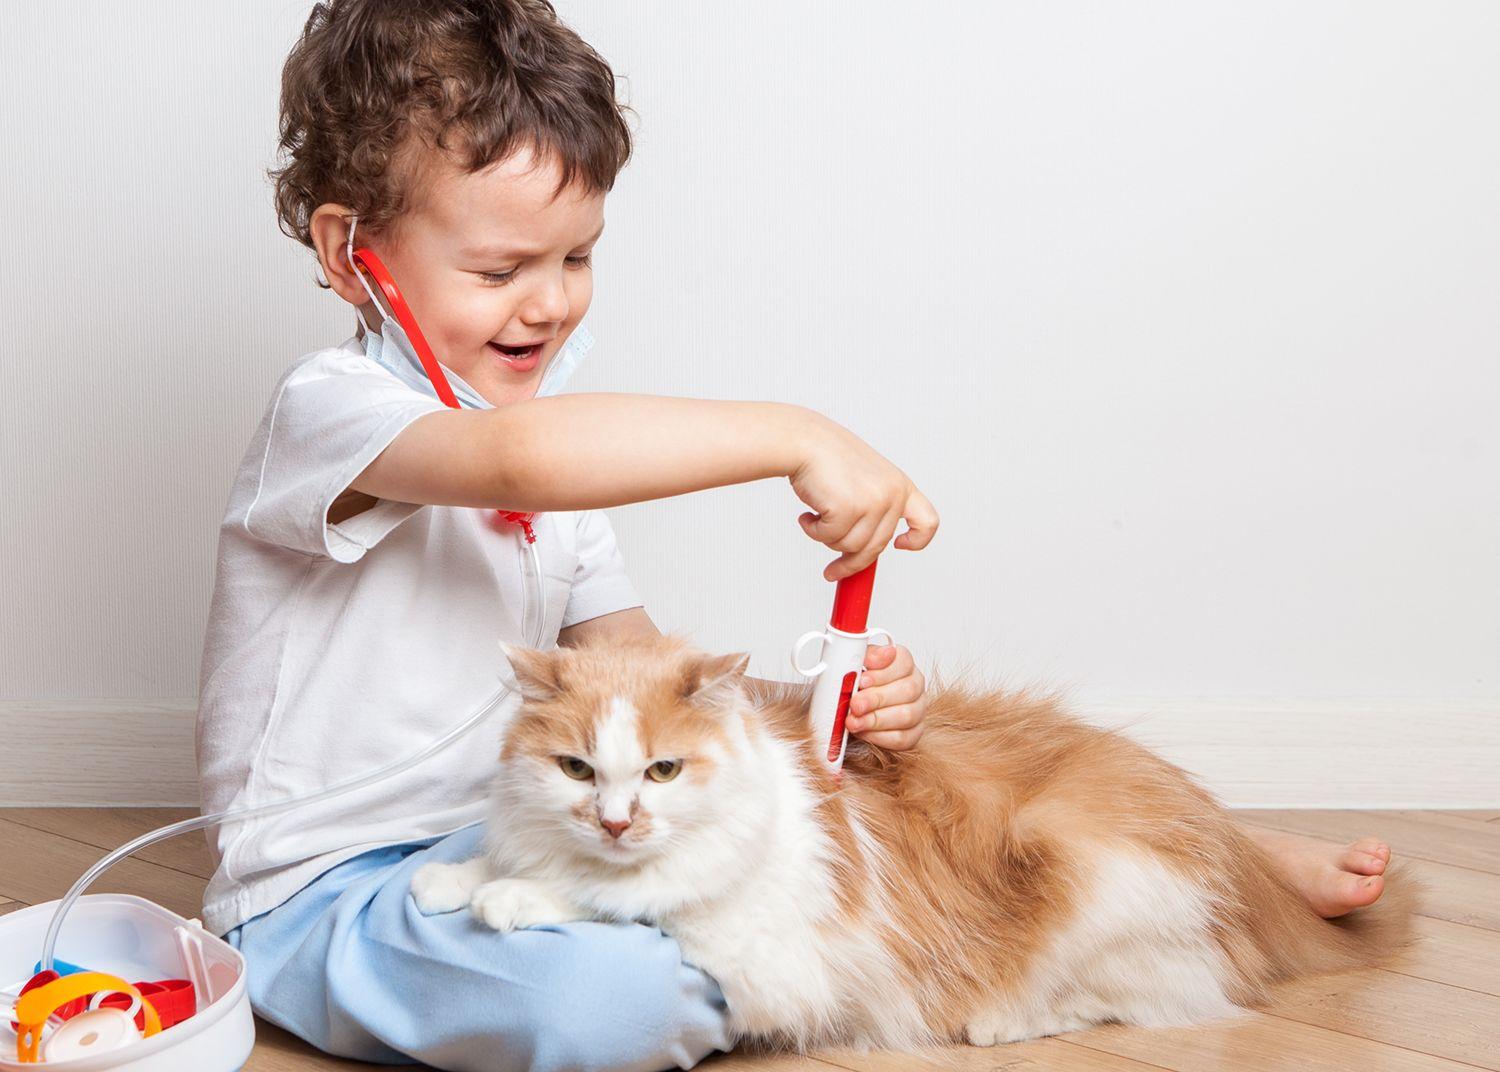 Boy gives cat an injection.